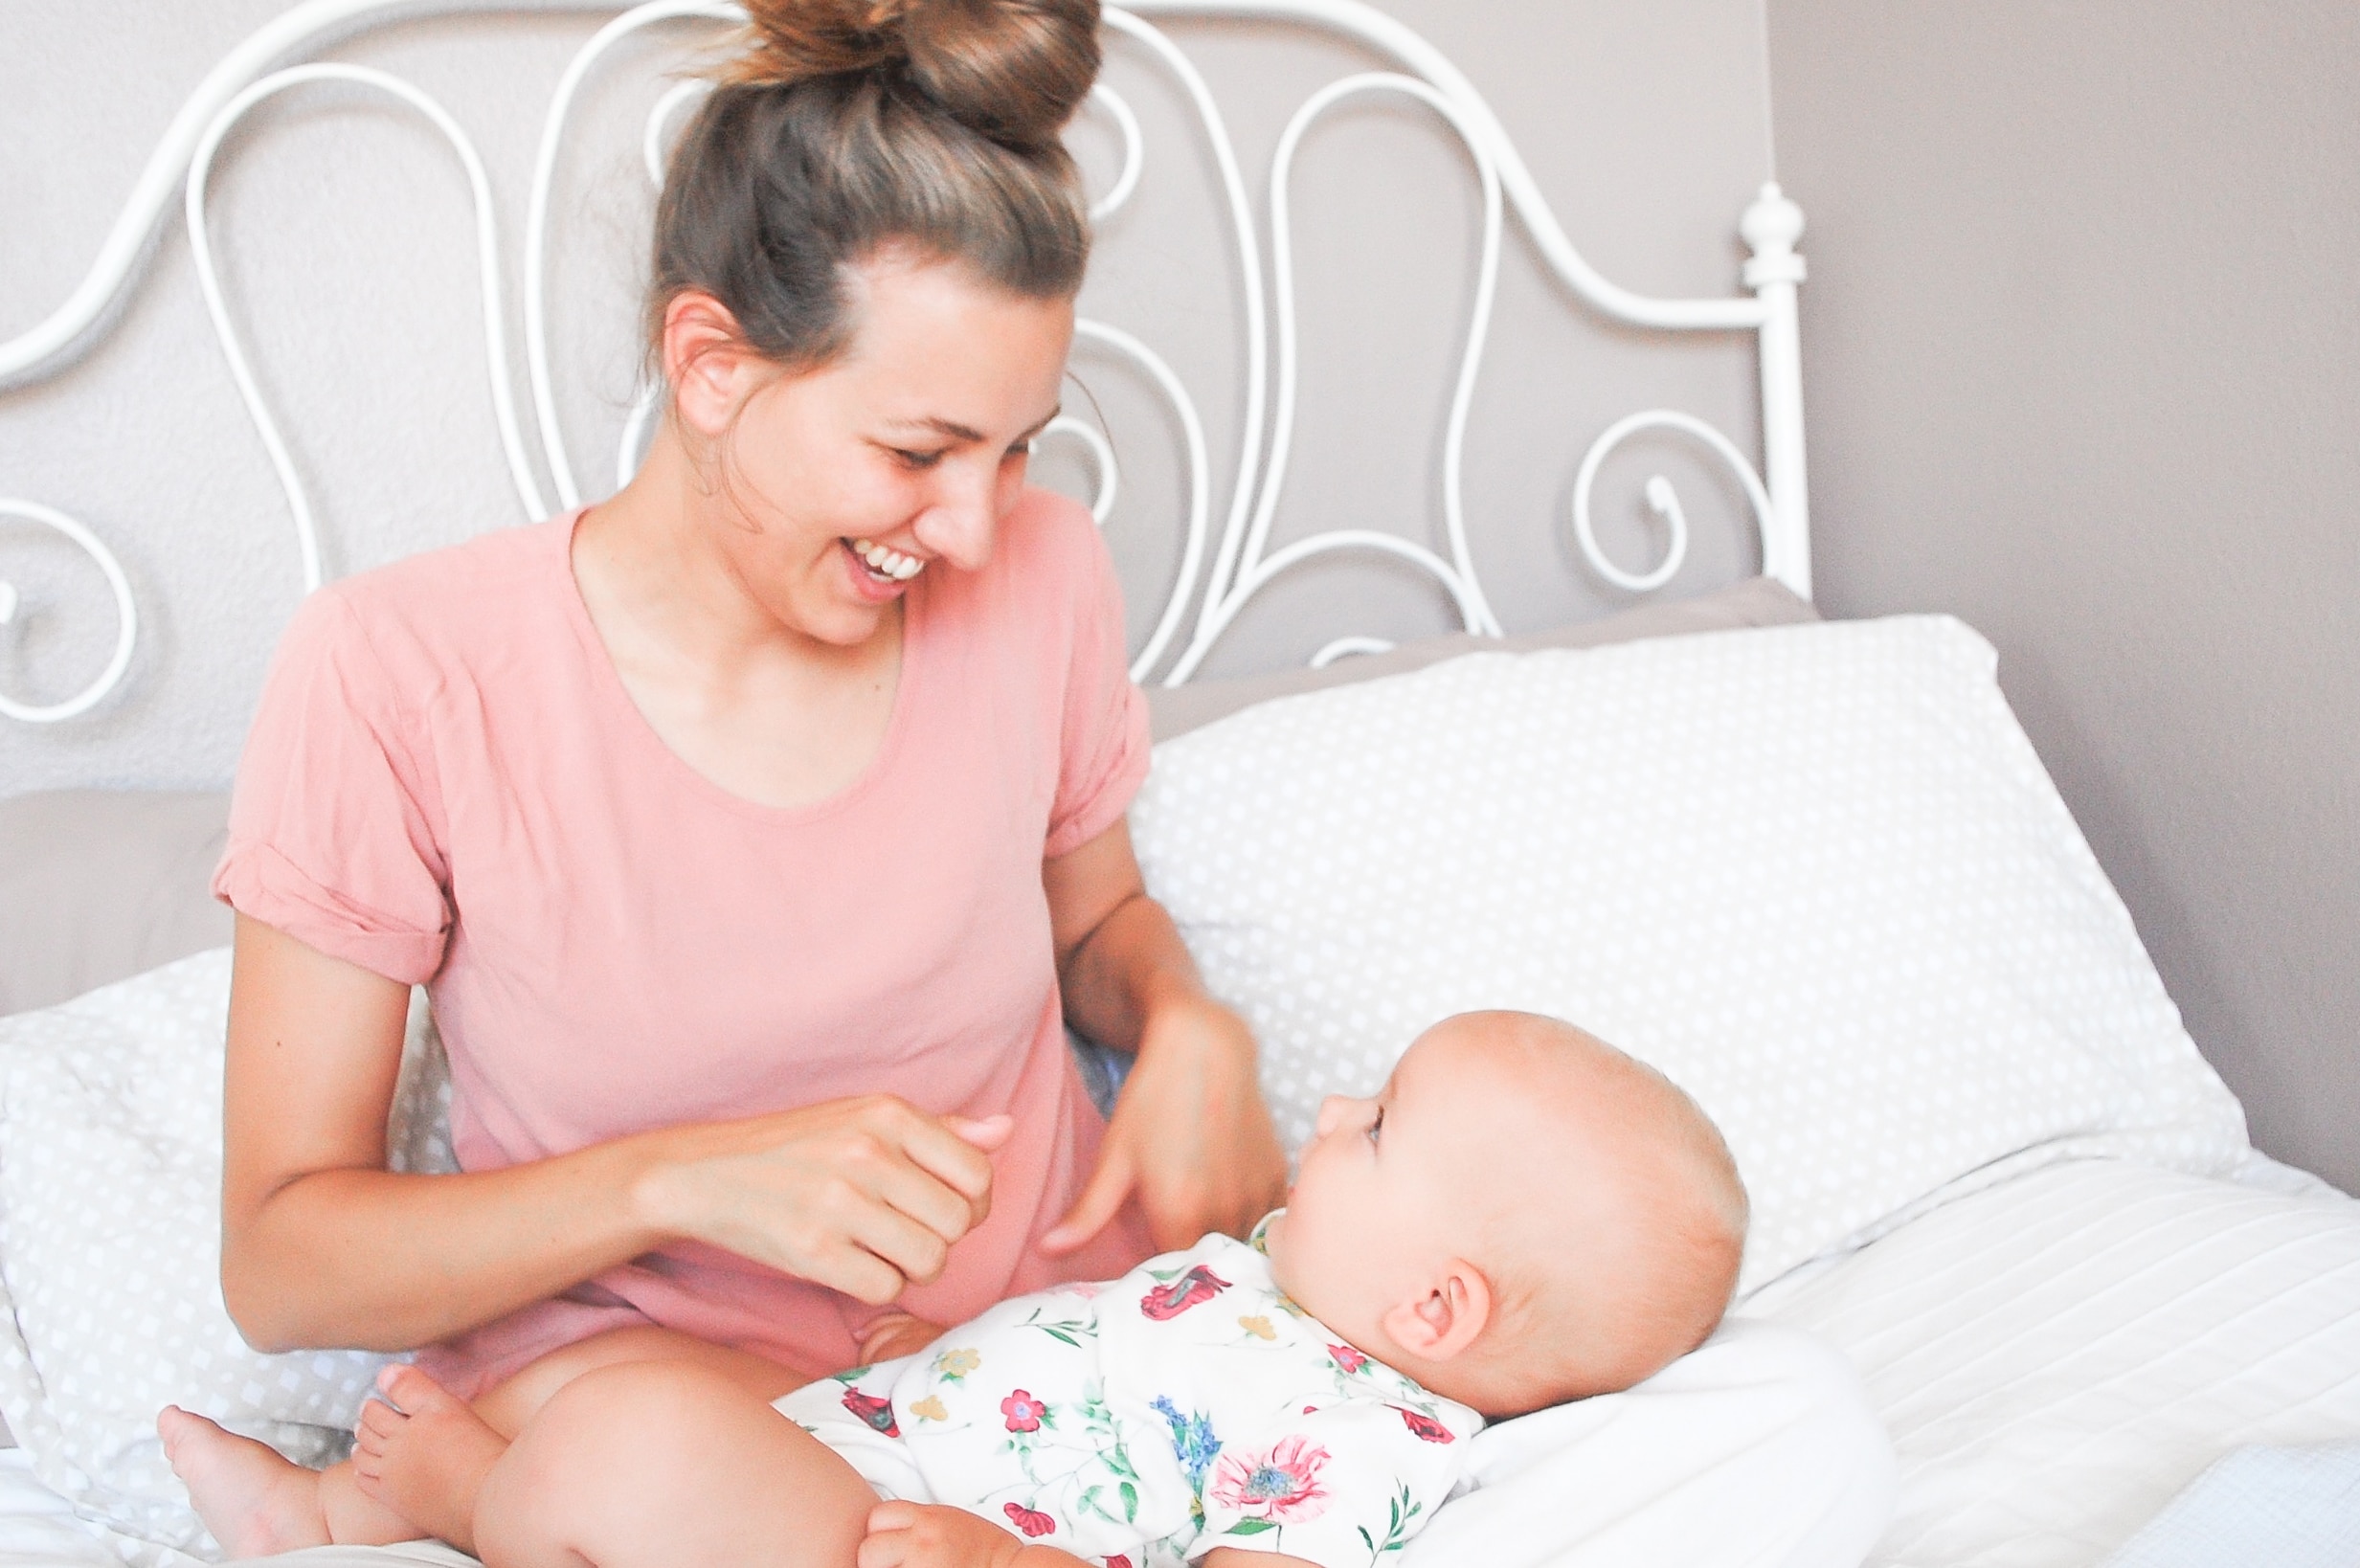 11 Breastfeeding Truth Bombs: The good, the bad, and the embarrassing